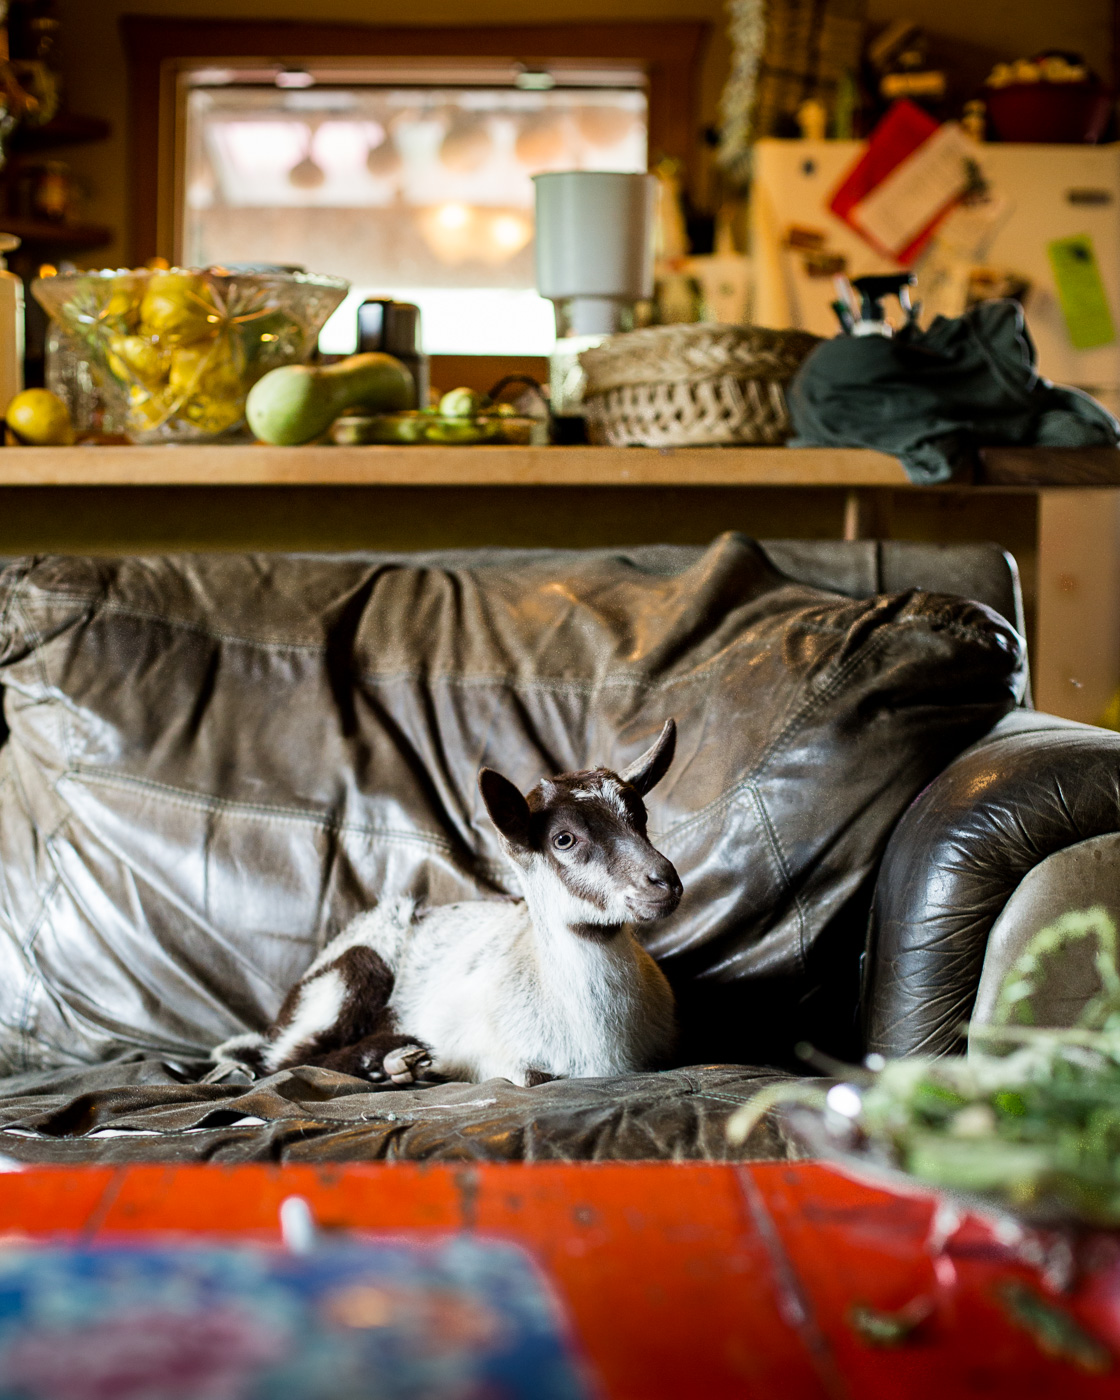 Sara Stathas farm photographer - a goat sits on the couch in the farm house